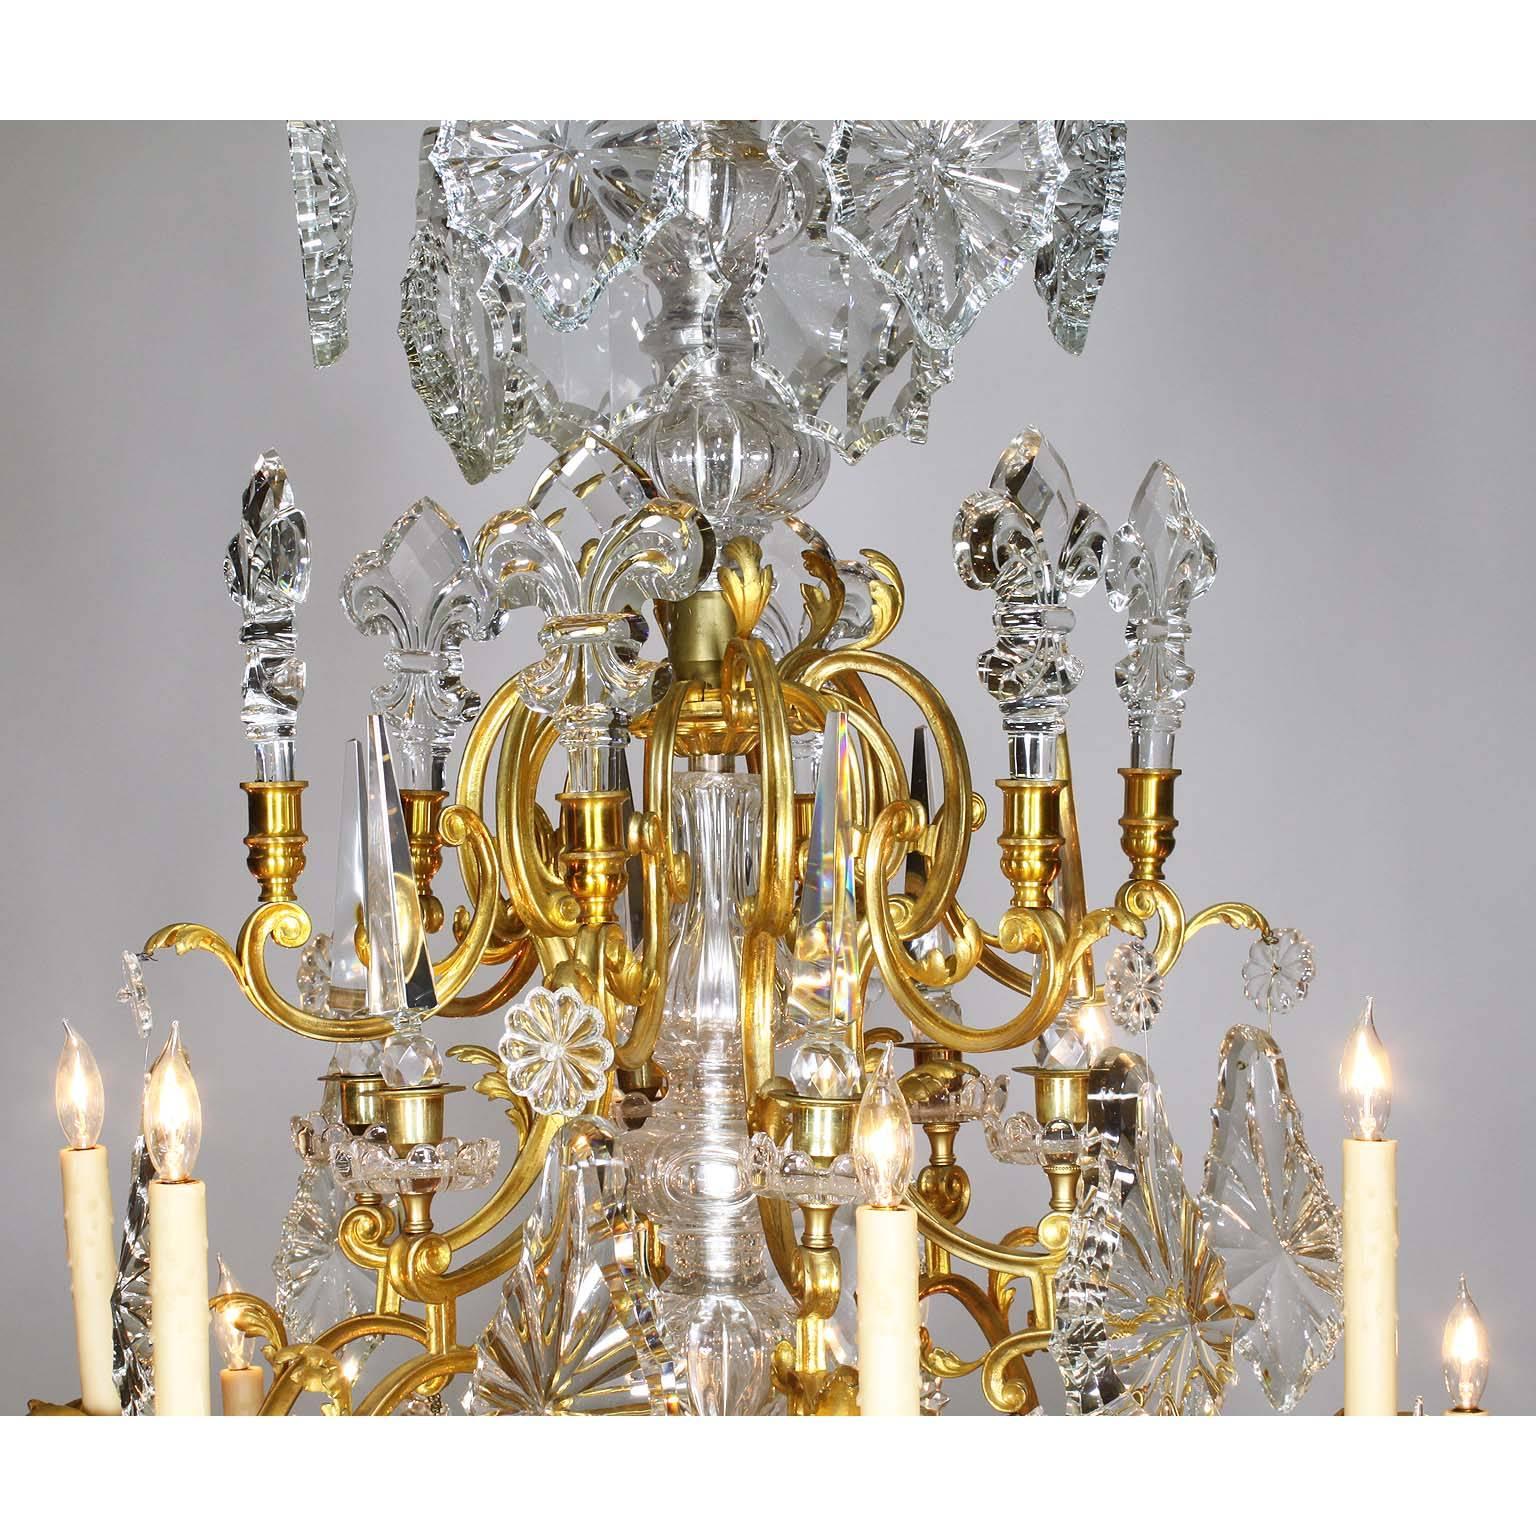 French 19th Century Louis XV Style Gilt-Bronze Crystal Chandelier Attr. Baccarat In Good Condition For Sale In Los Angeles, CA